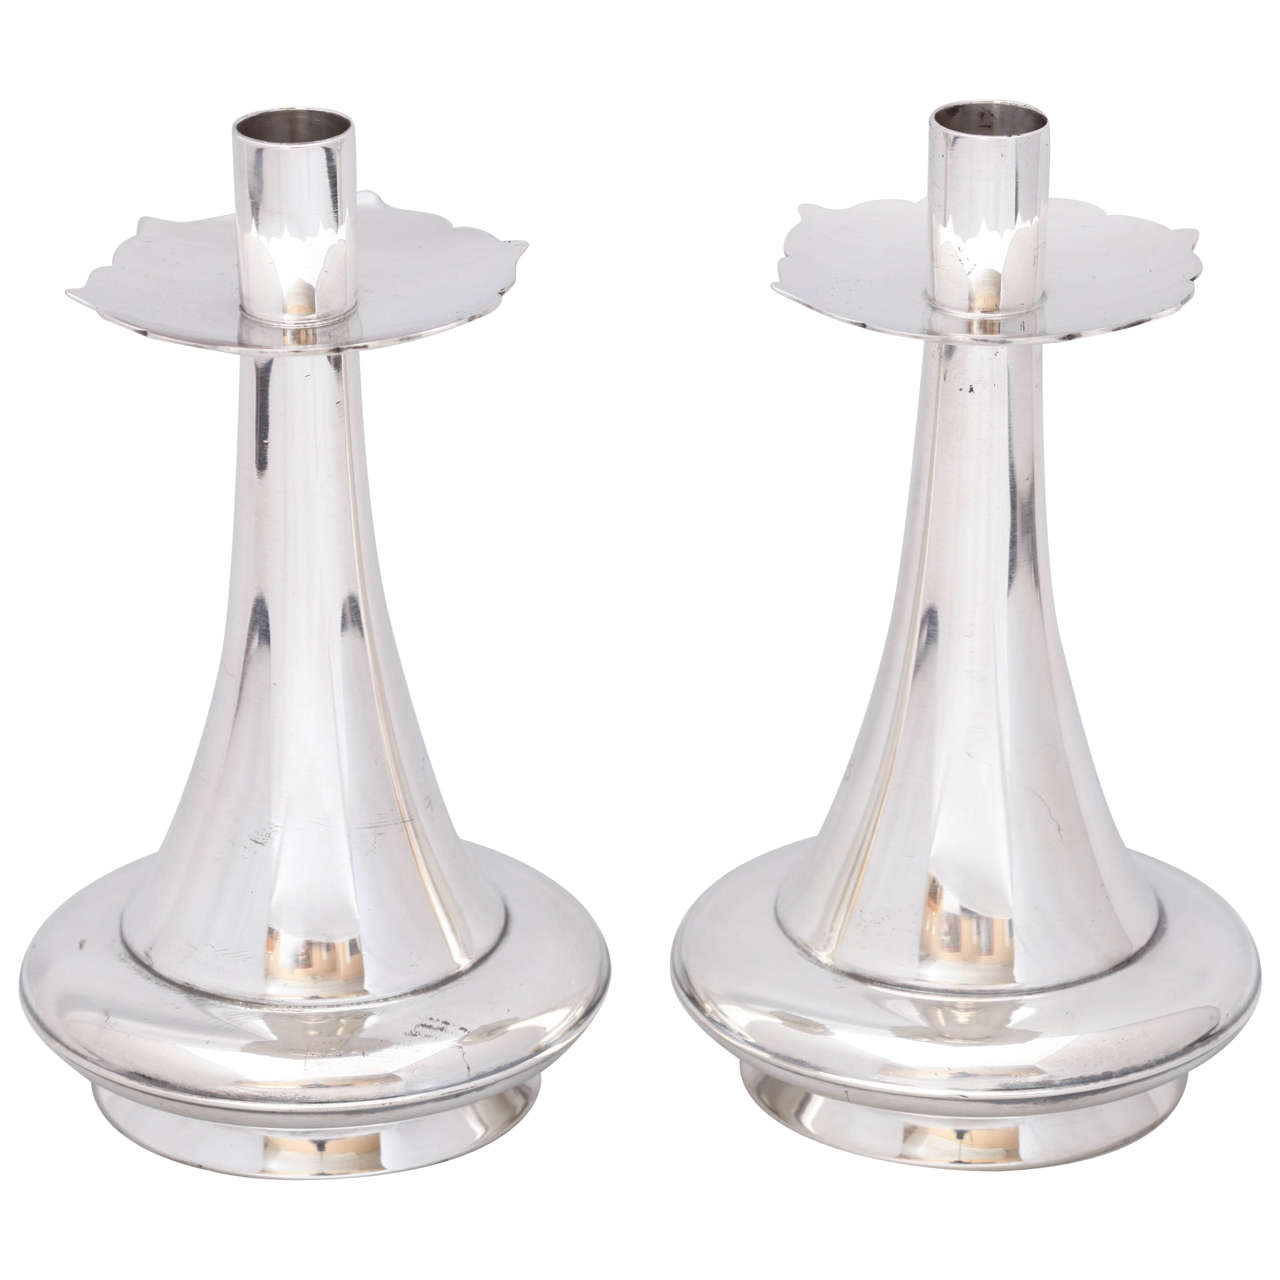 Unusual Pair of Mid-Century Modern Sterling Silver Candlesticks By Gorham